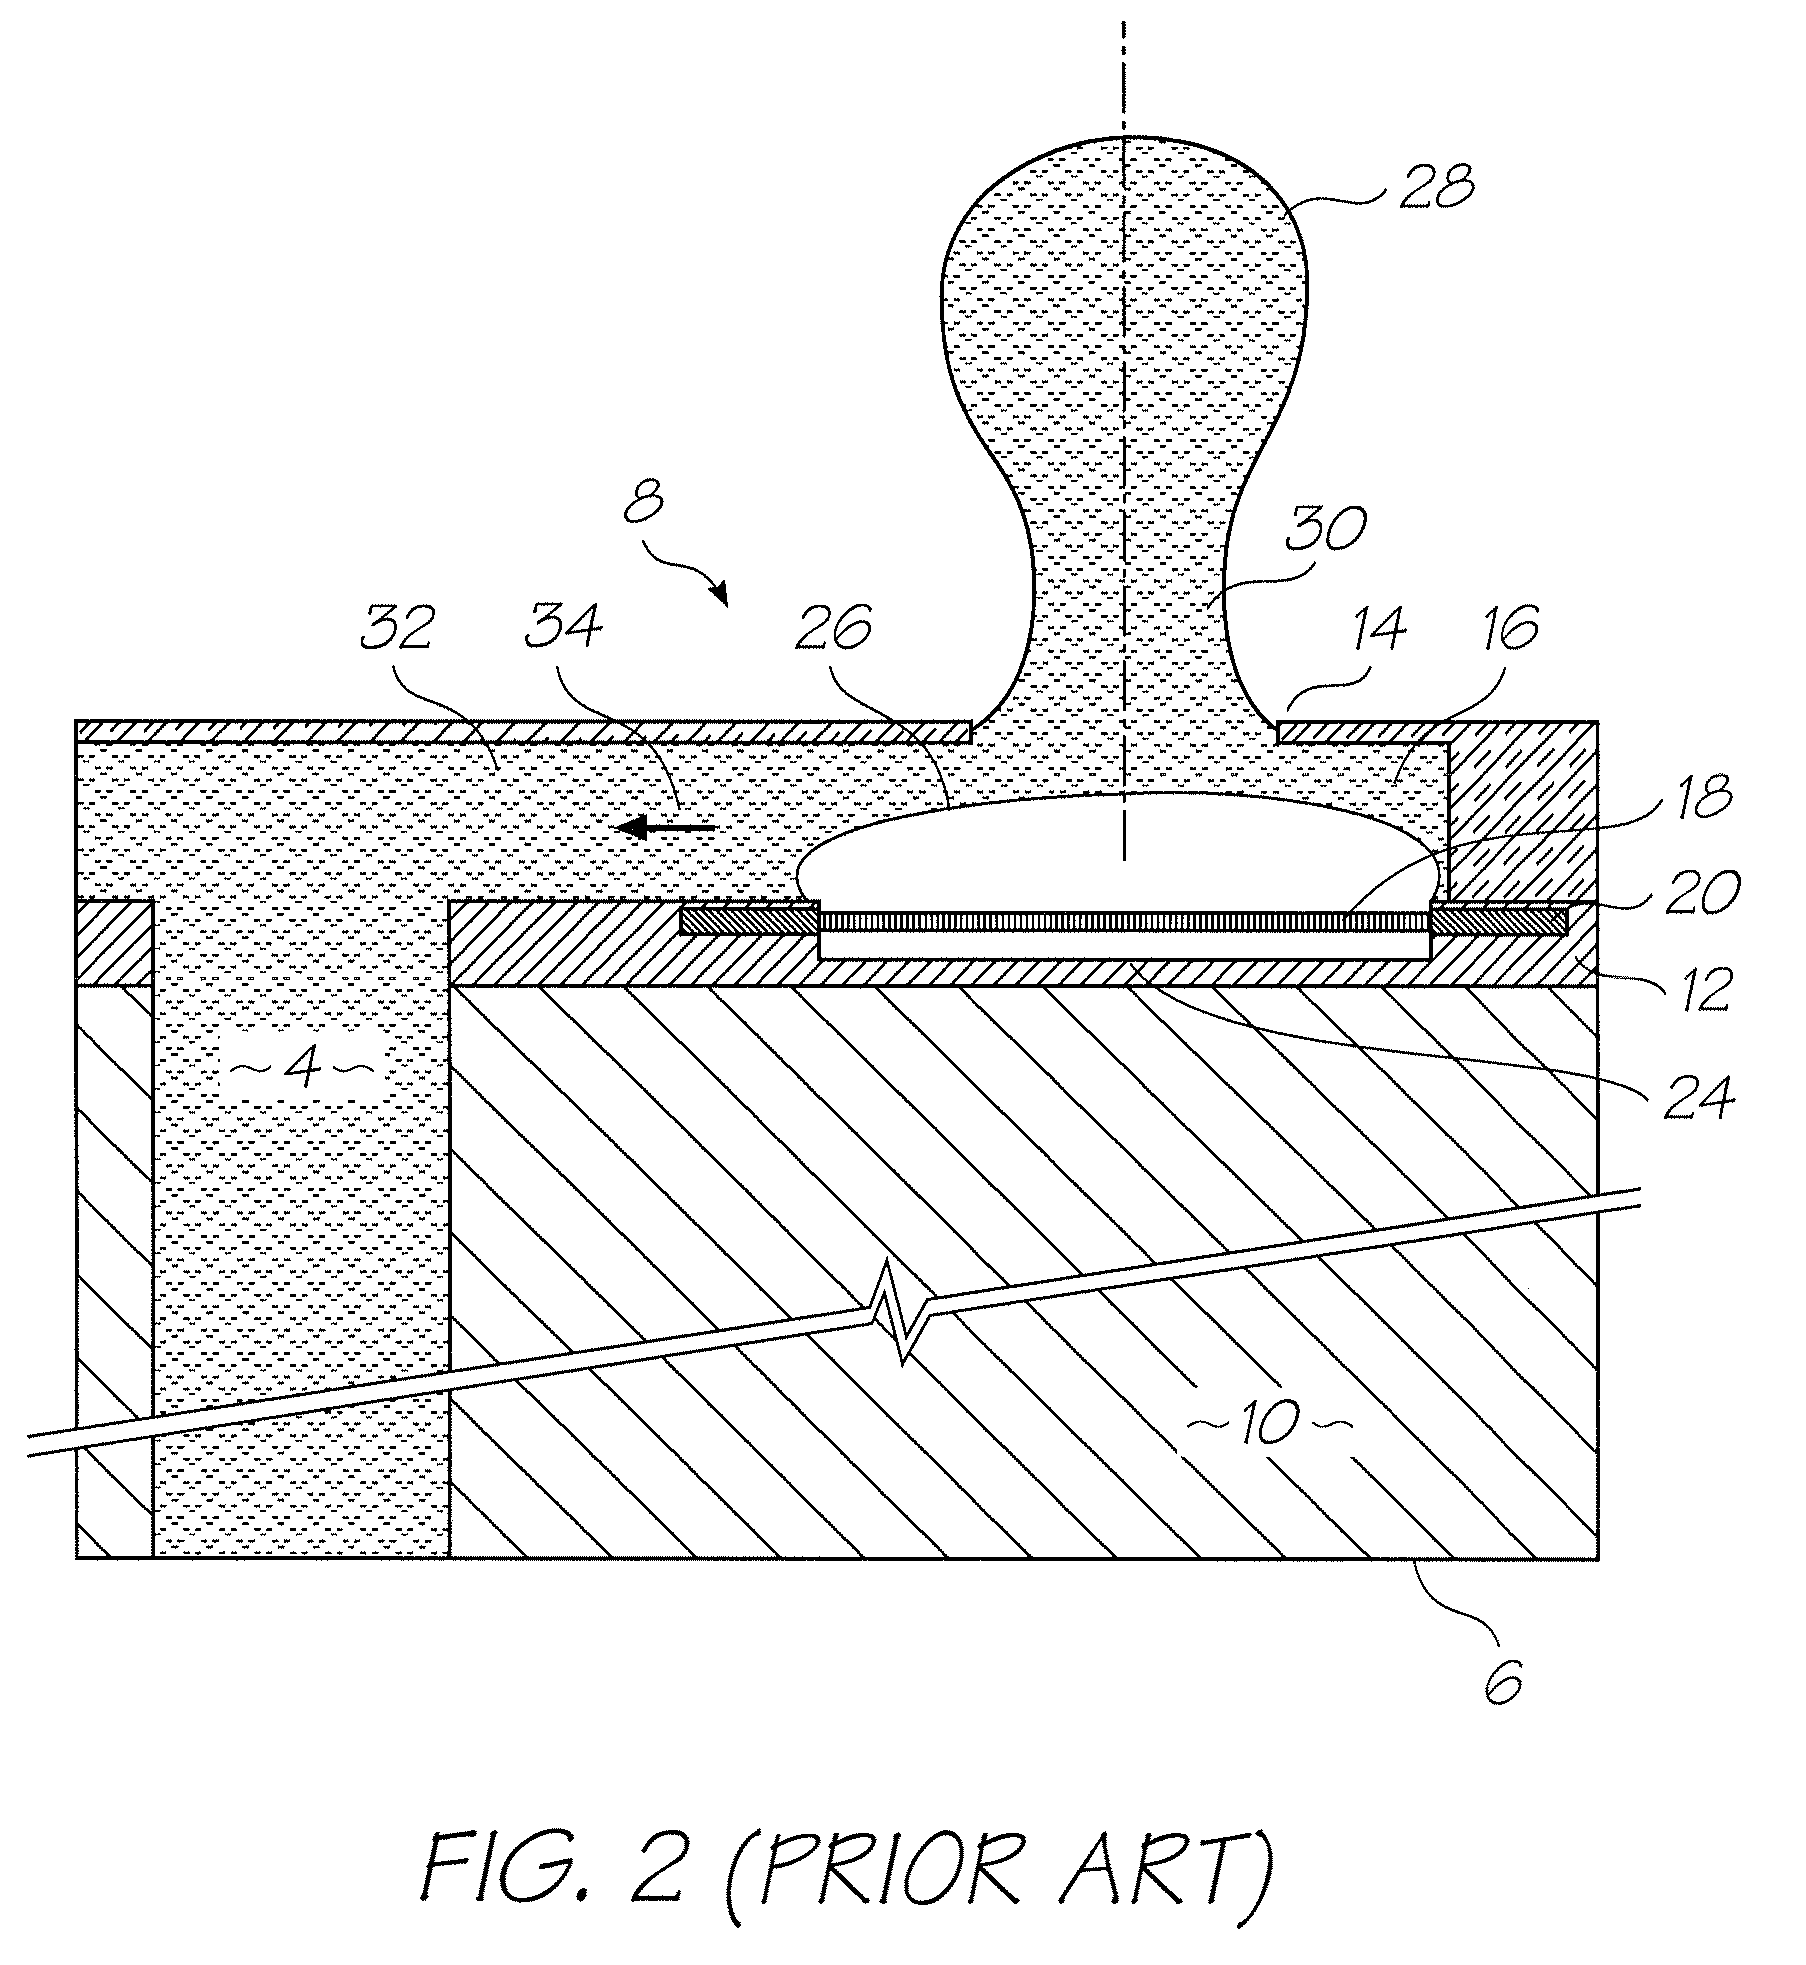 Printhead with heaters offset from nozzles